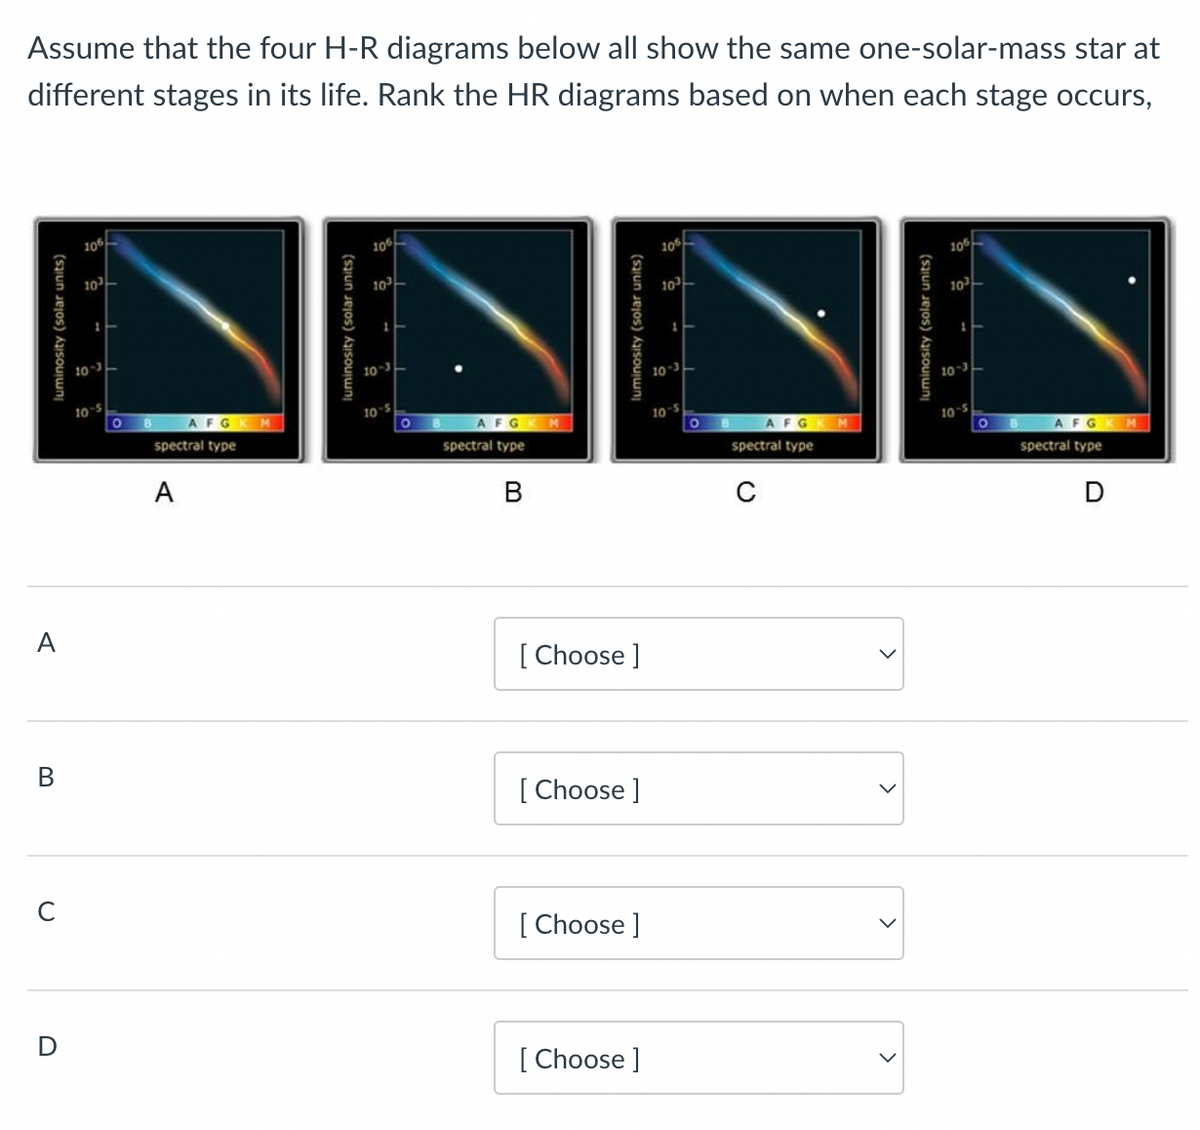 Assume that the four H-R diagrams below all show the same one-solar-mass star at
different stages in its life. Rank the HR diagrams based on when each stage occurs,
A
B
D
10%
10²
1
10-3
10-5
O
AFG
spectral type
A
10%
26
10³-
11
10-3
10
O
AFGKM
spectral type
B
[Choose ]
[Choose ]
[Choose ]
[Choose ]
10%
10³-
1
10-3
10-5
O
AFG
spectral type
с
10%
10
1
10-3
10-5
O
AFGK M
spectral type